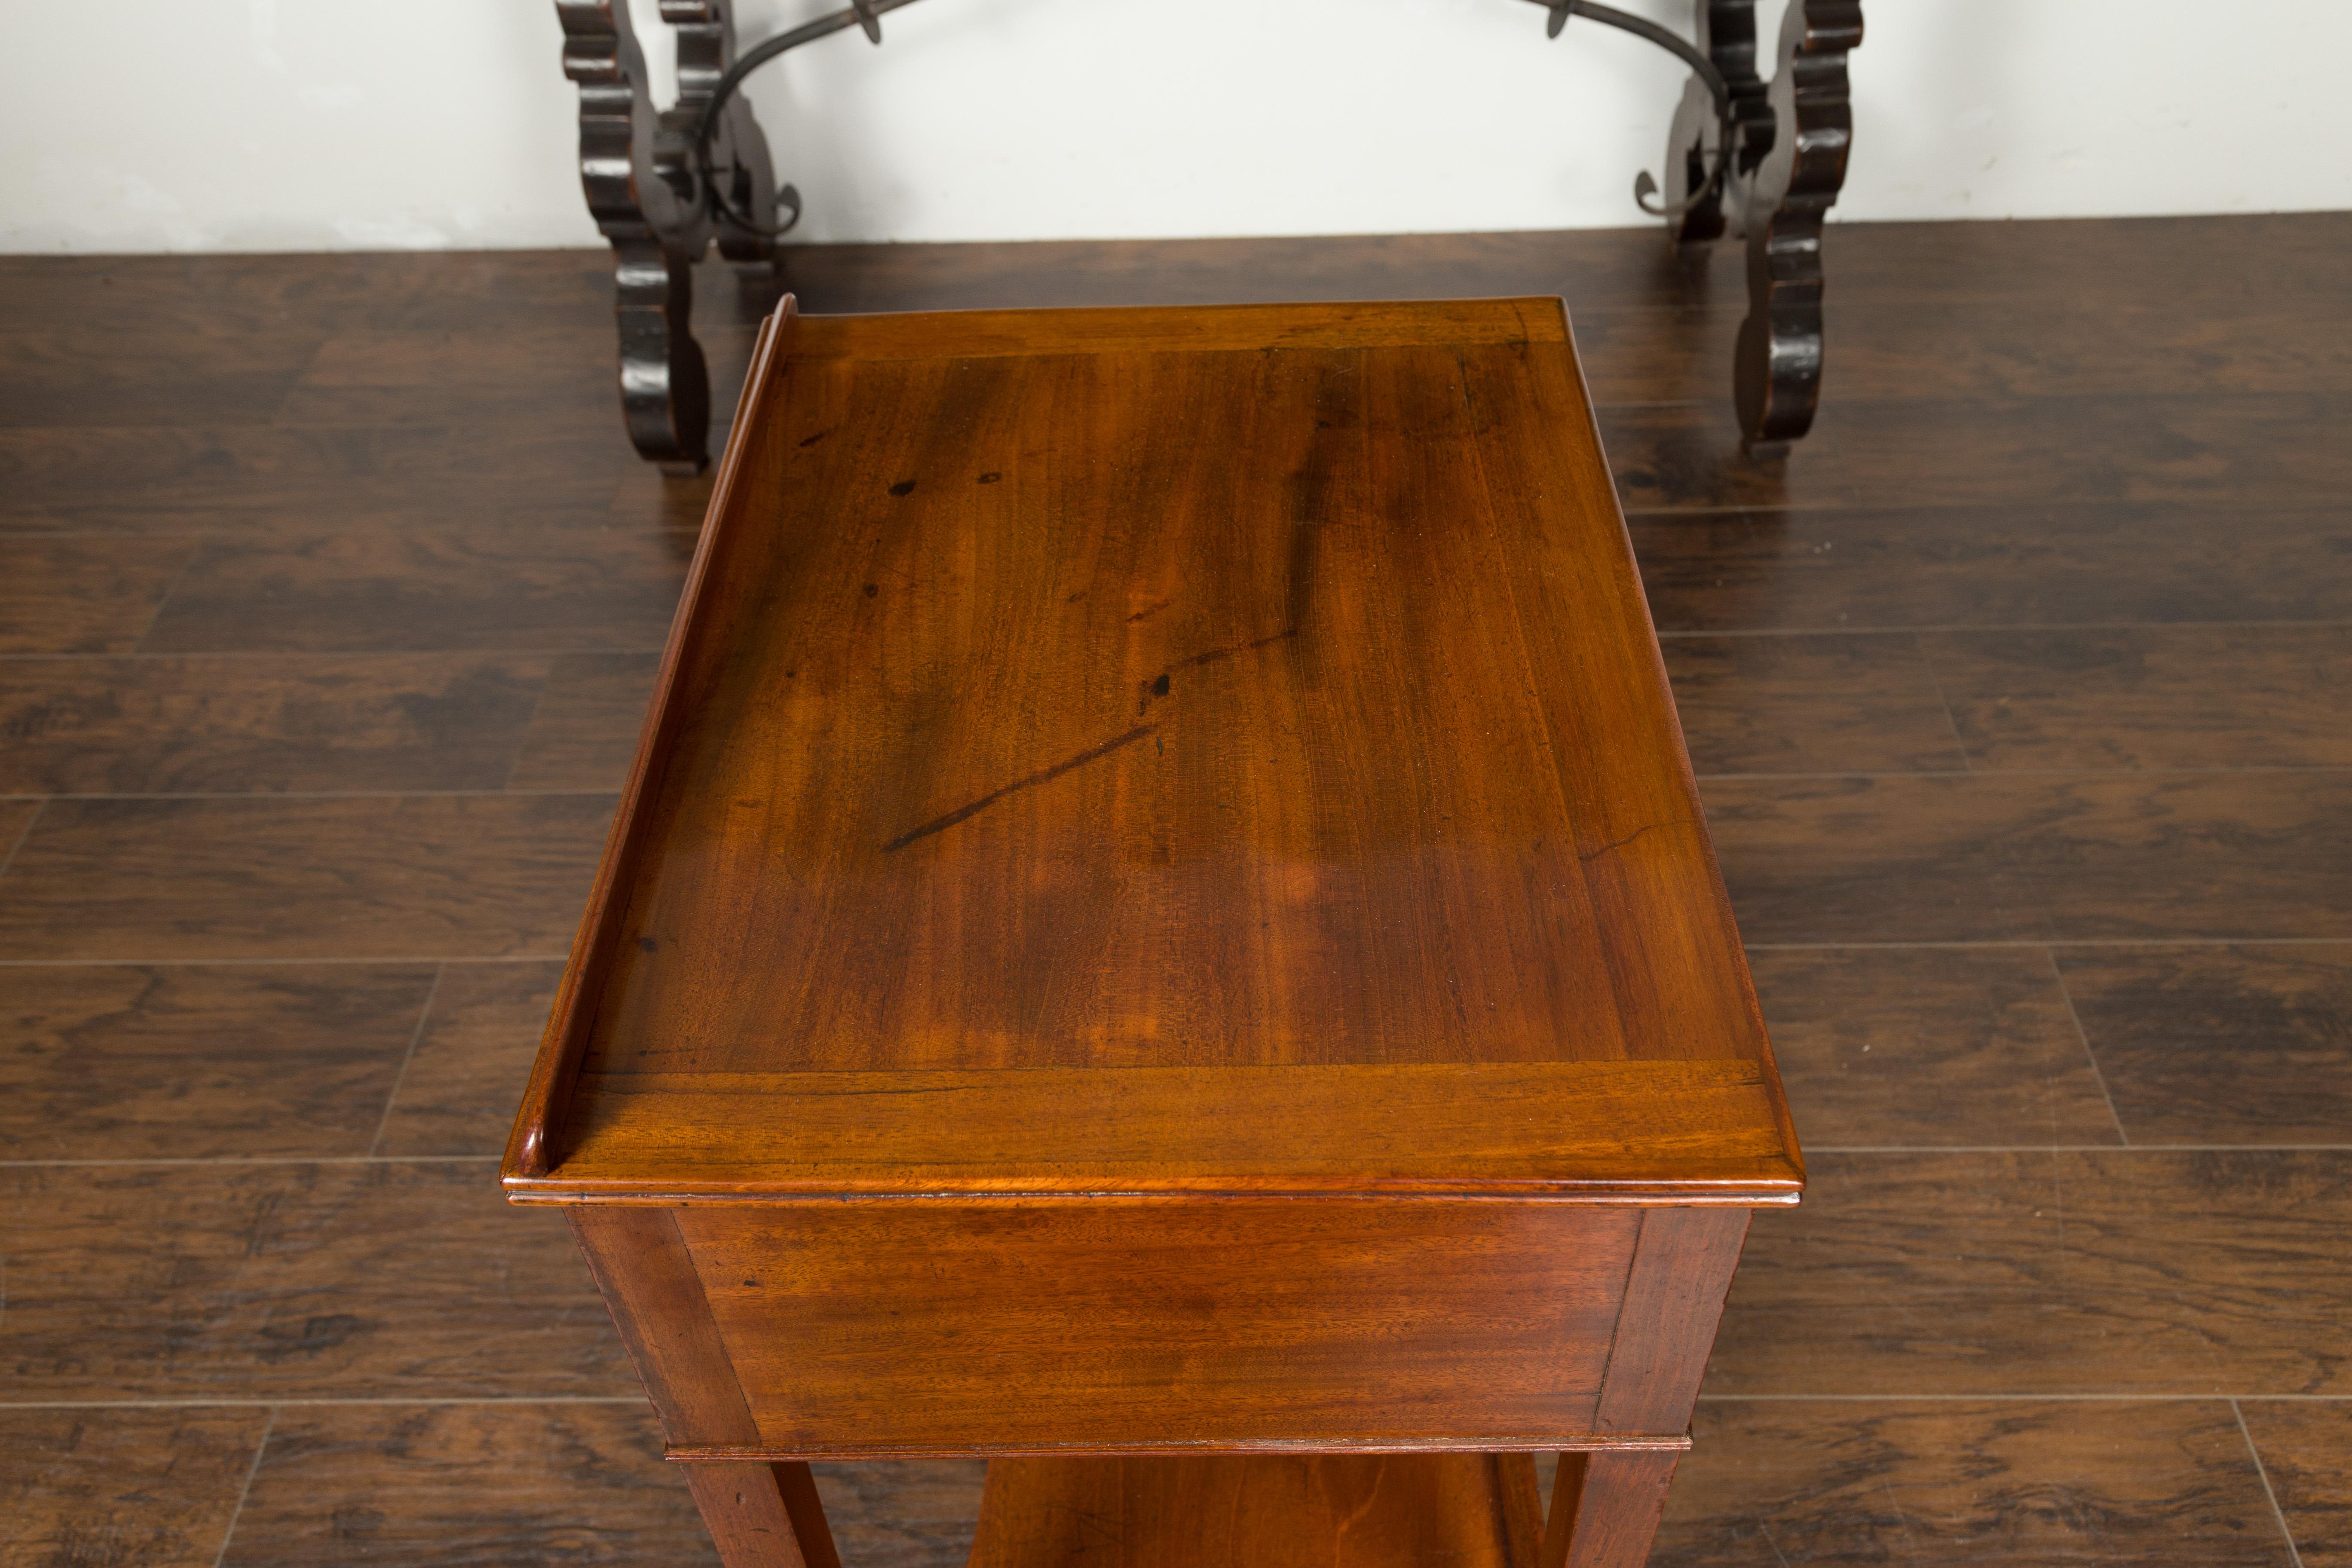 English 1820s Mahogany Architect's Table with Tilt Top, Single Drawer and Shelf 10